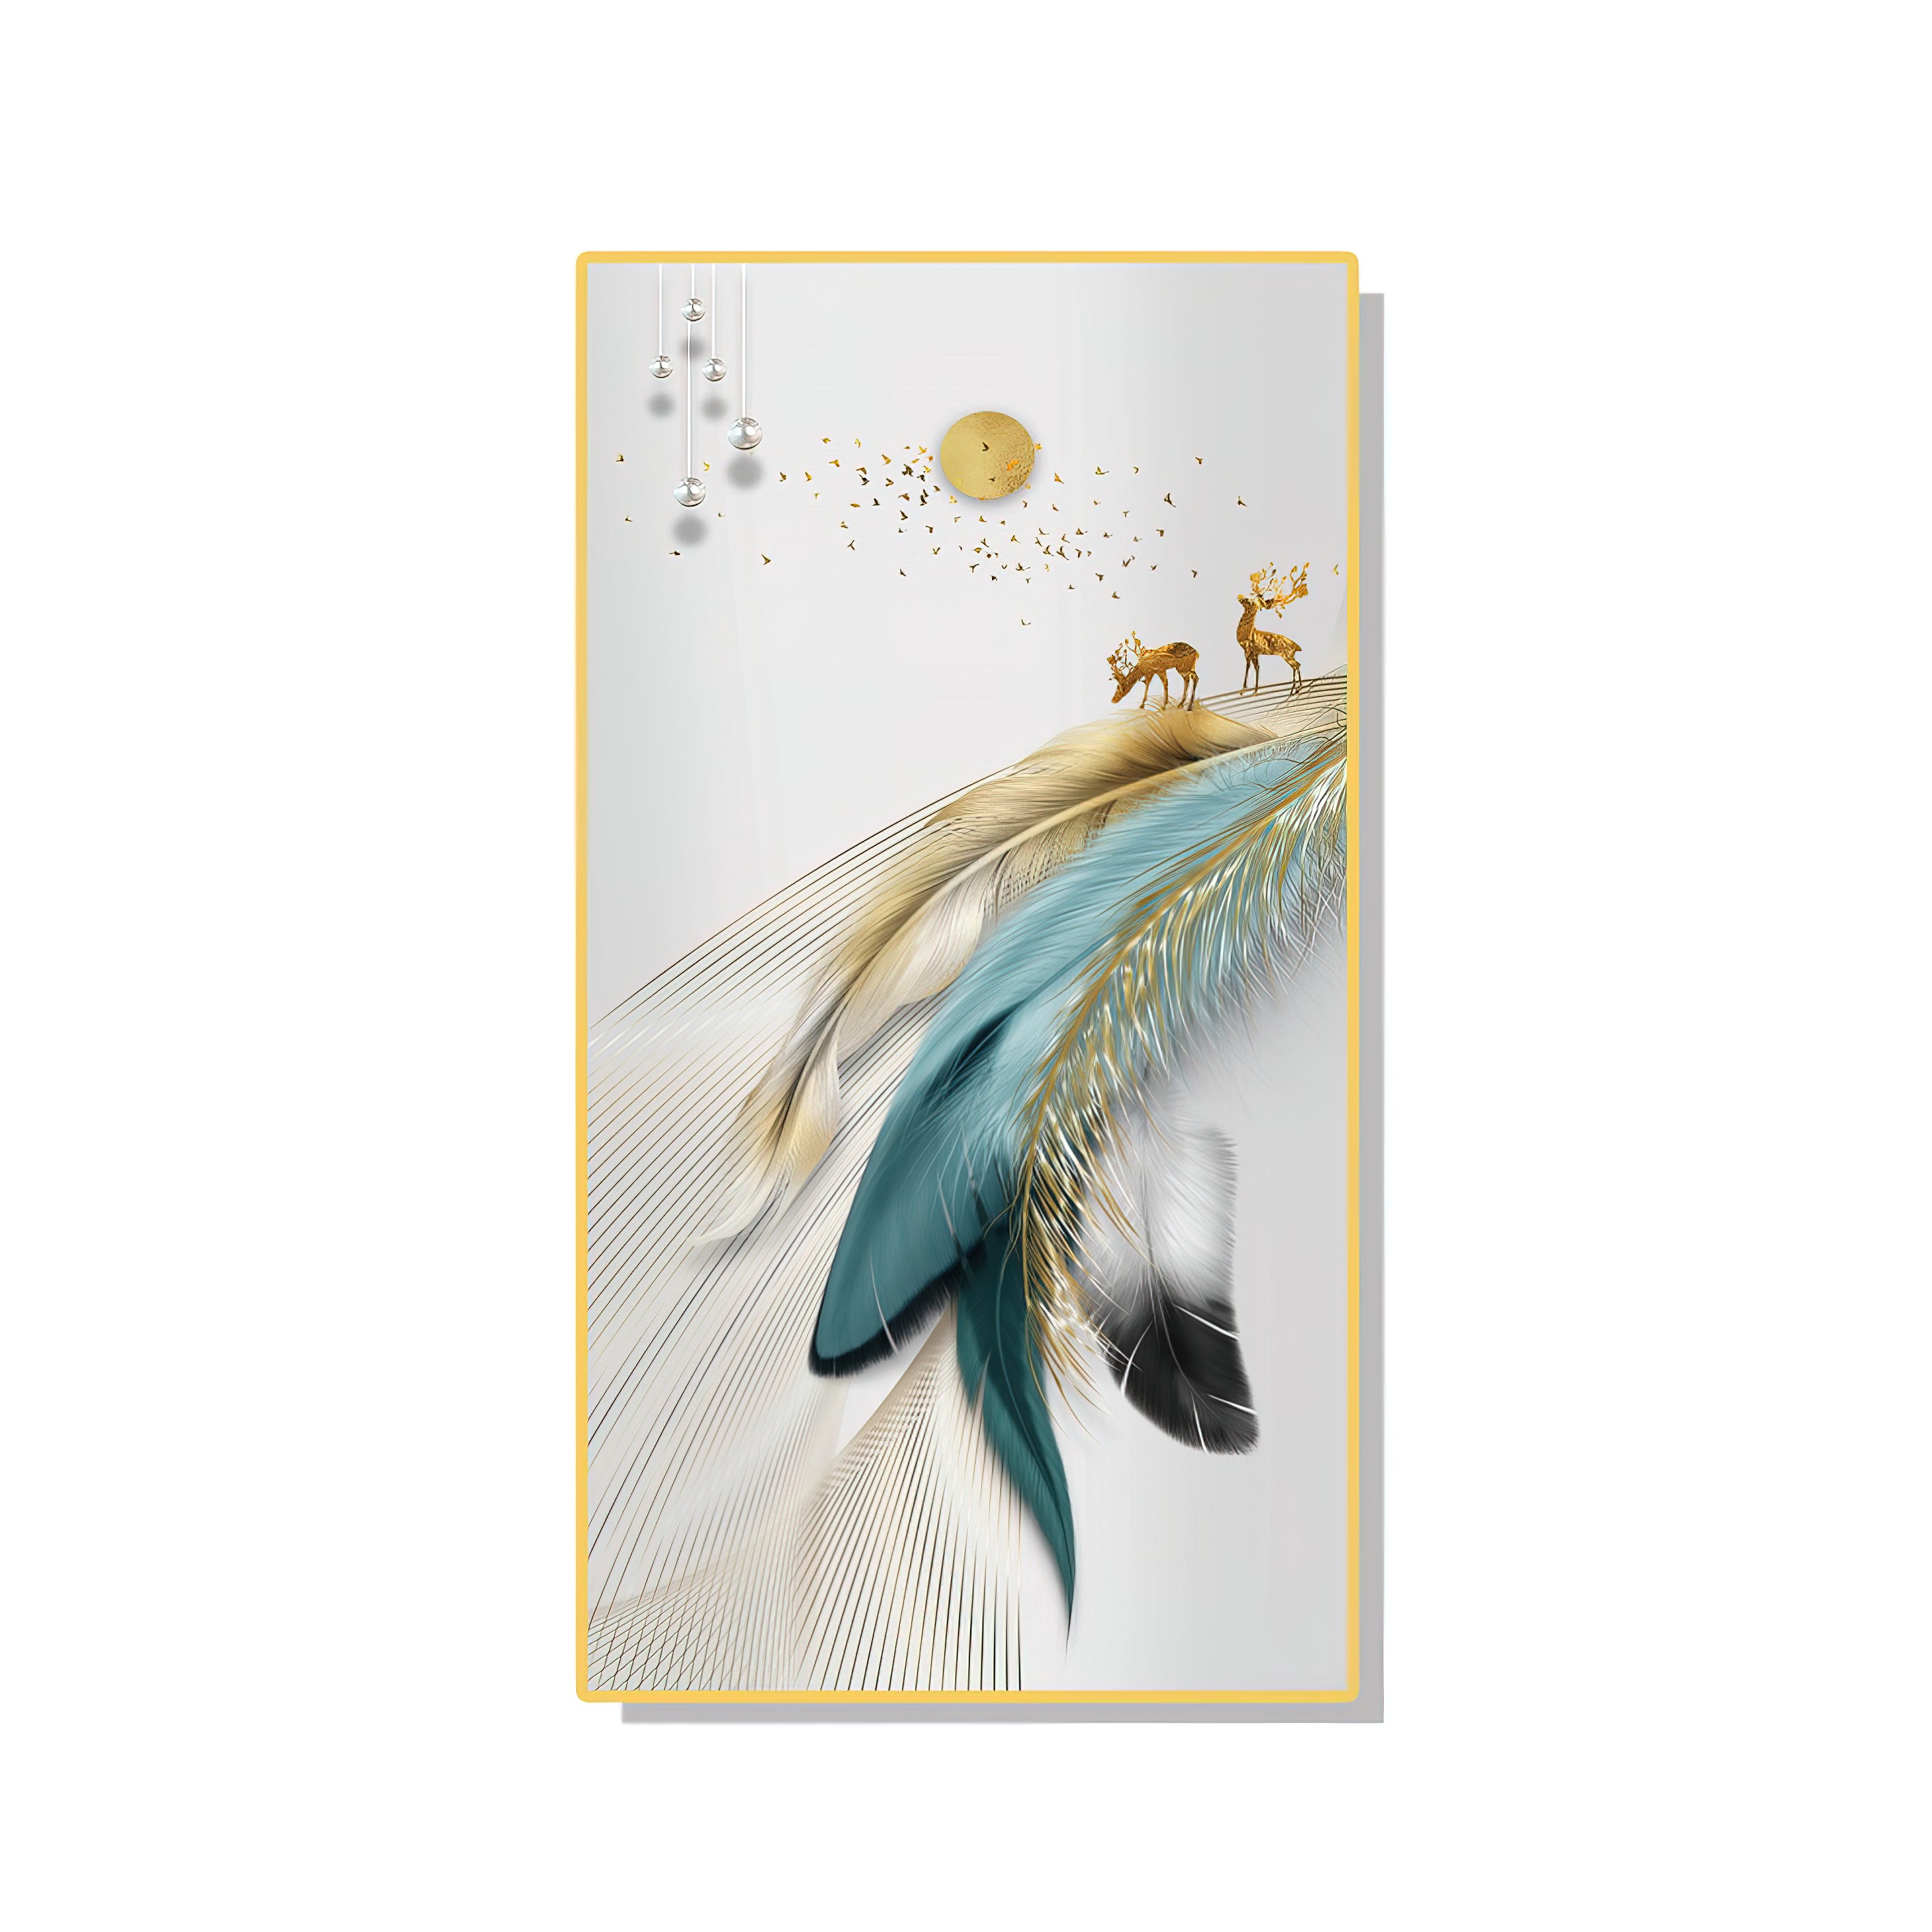 Turquoise Golden Feathers Abstract Wall Painting - 70x140 cm Artwork Home Decor crystal porcelain Framed Large wall wall art wall accents